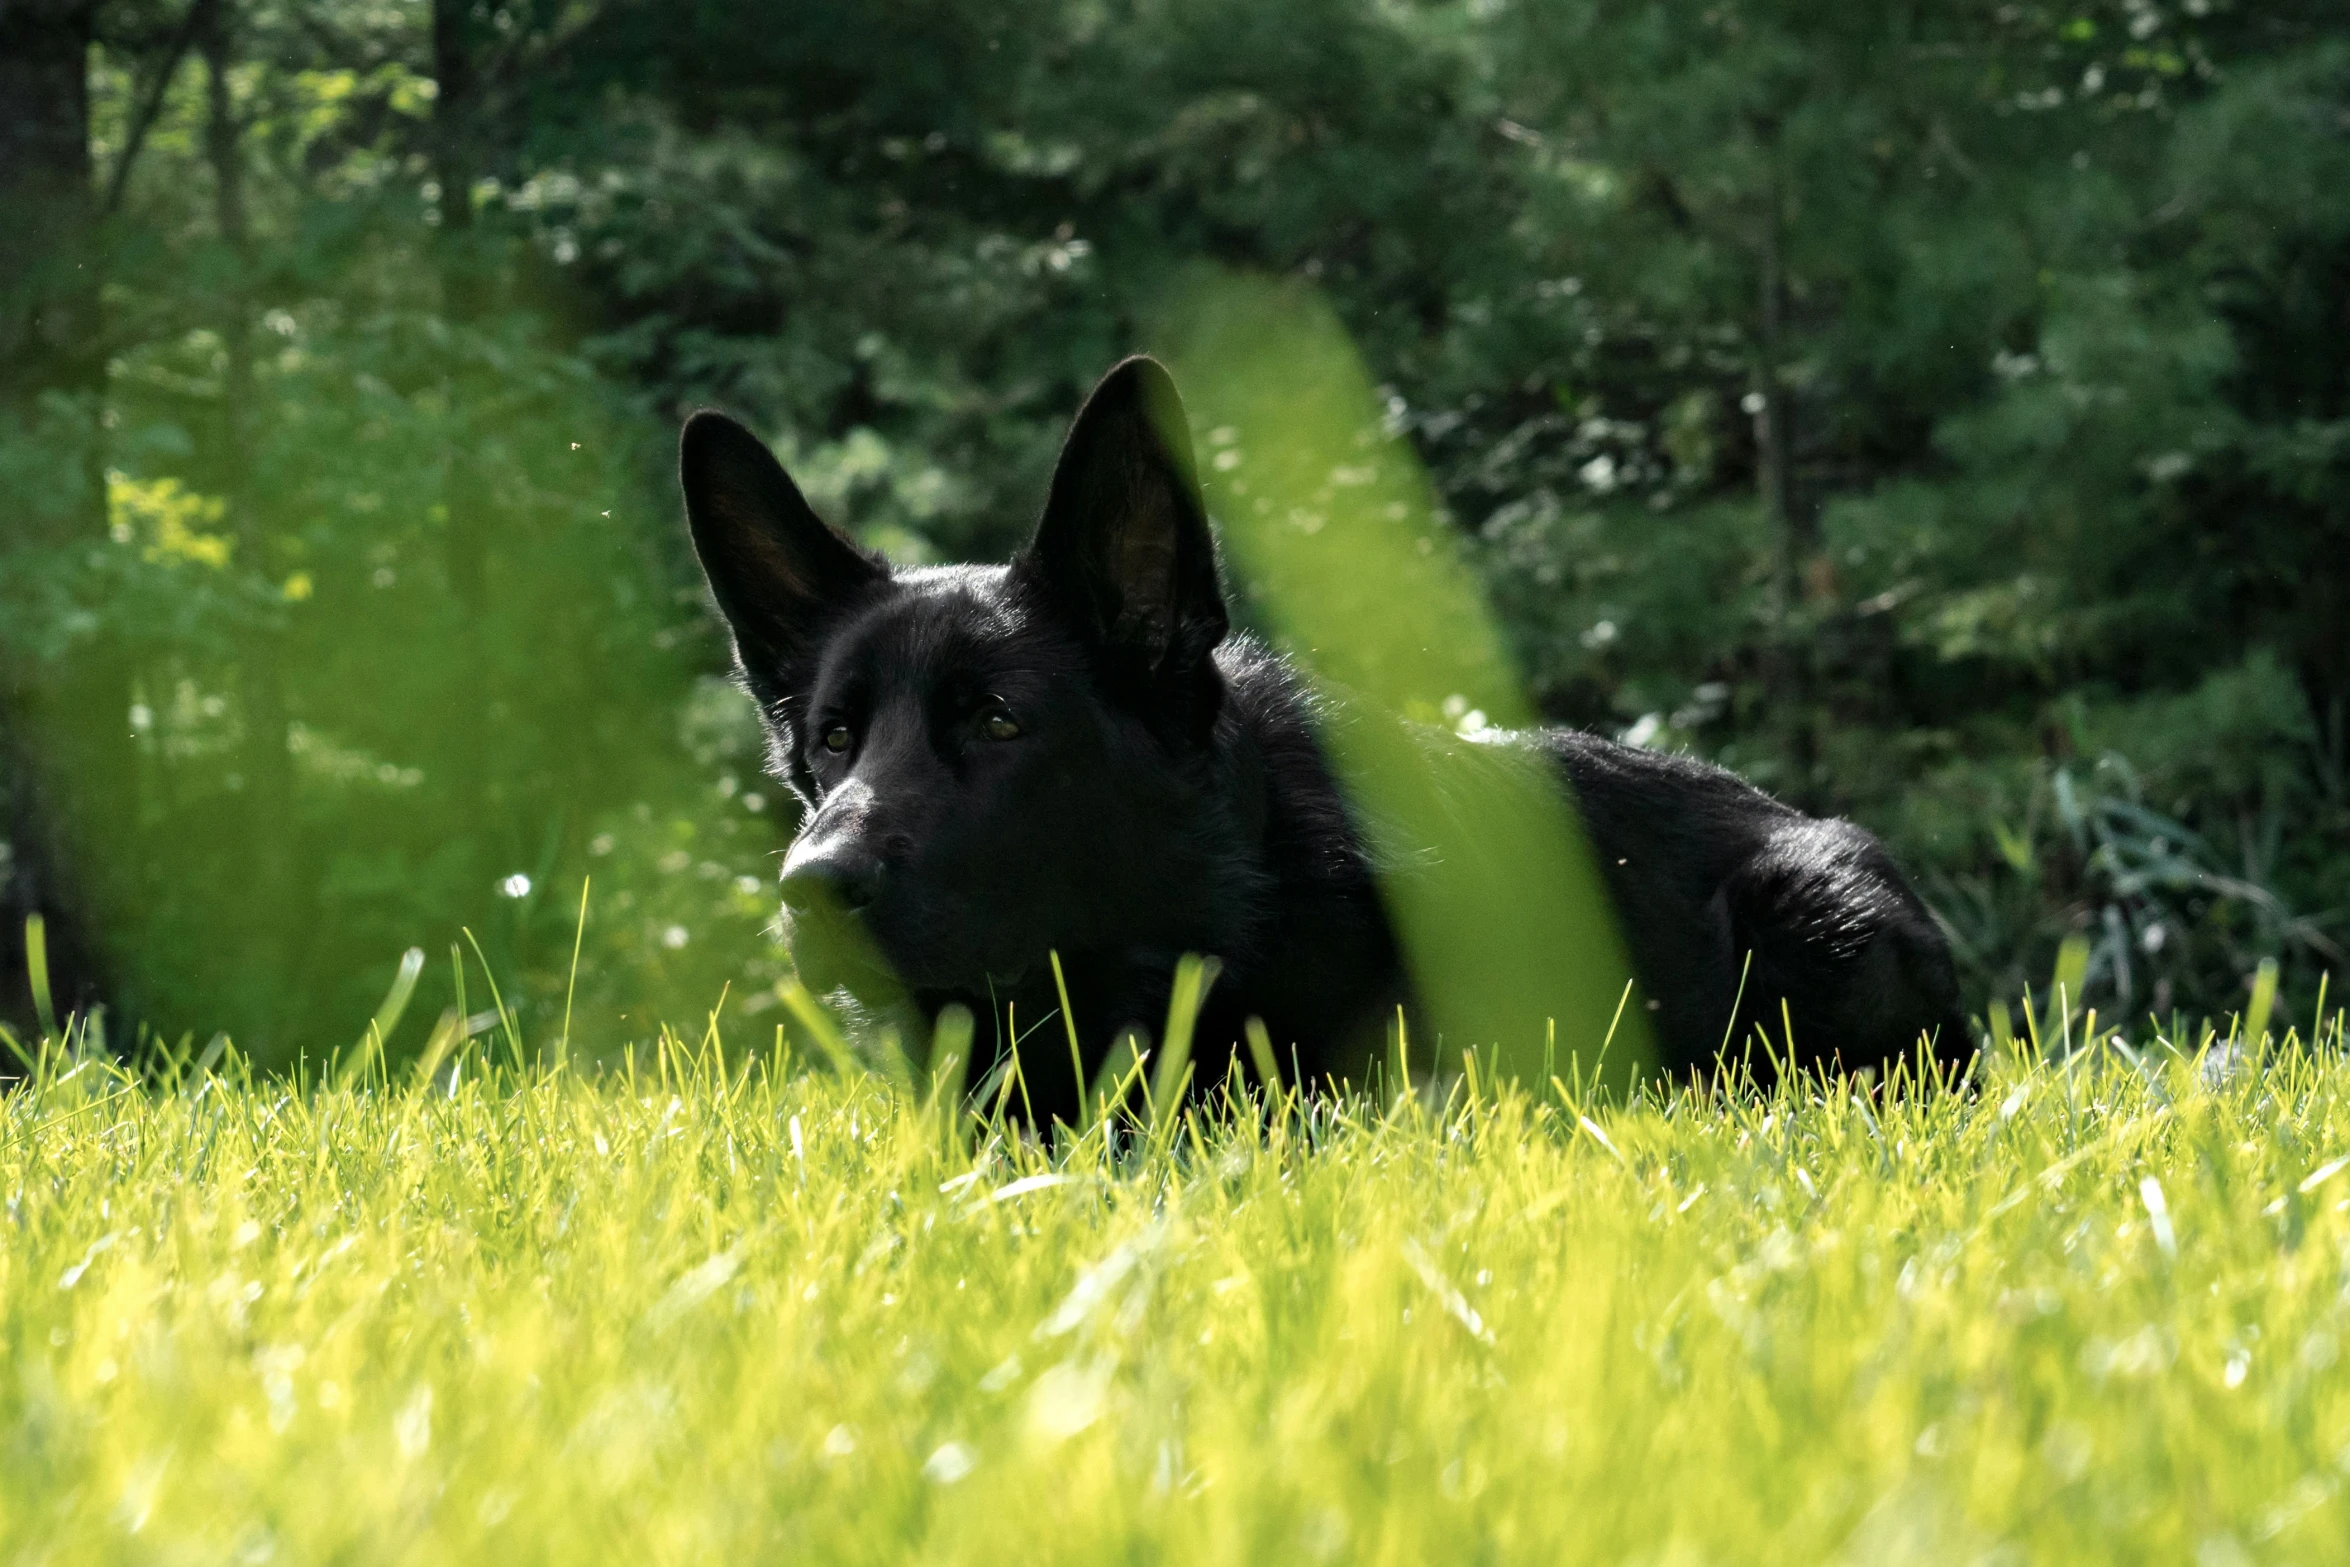 a black dog sitting in the grass near a forest